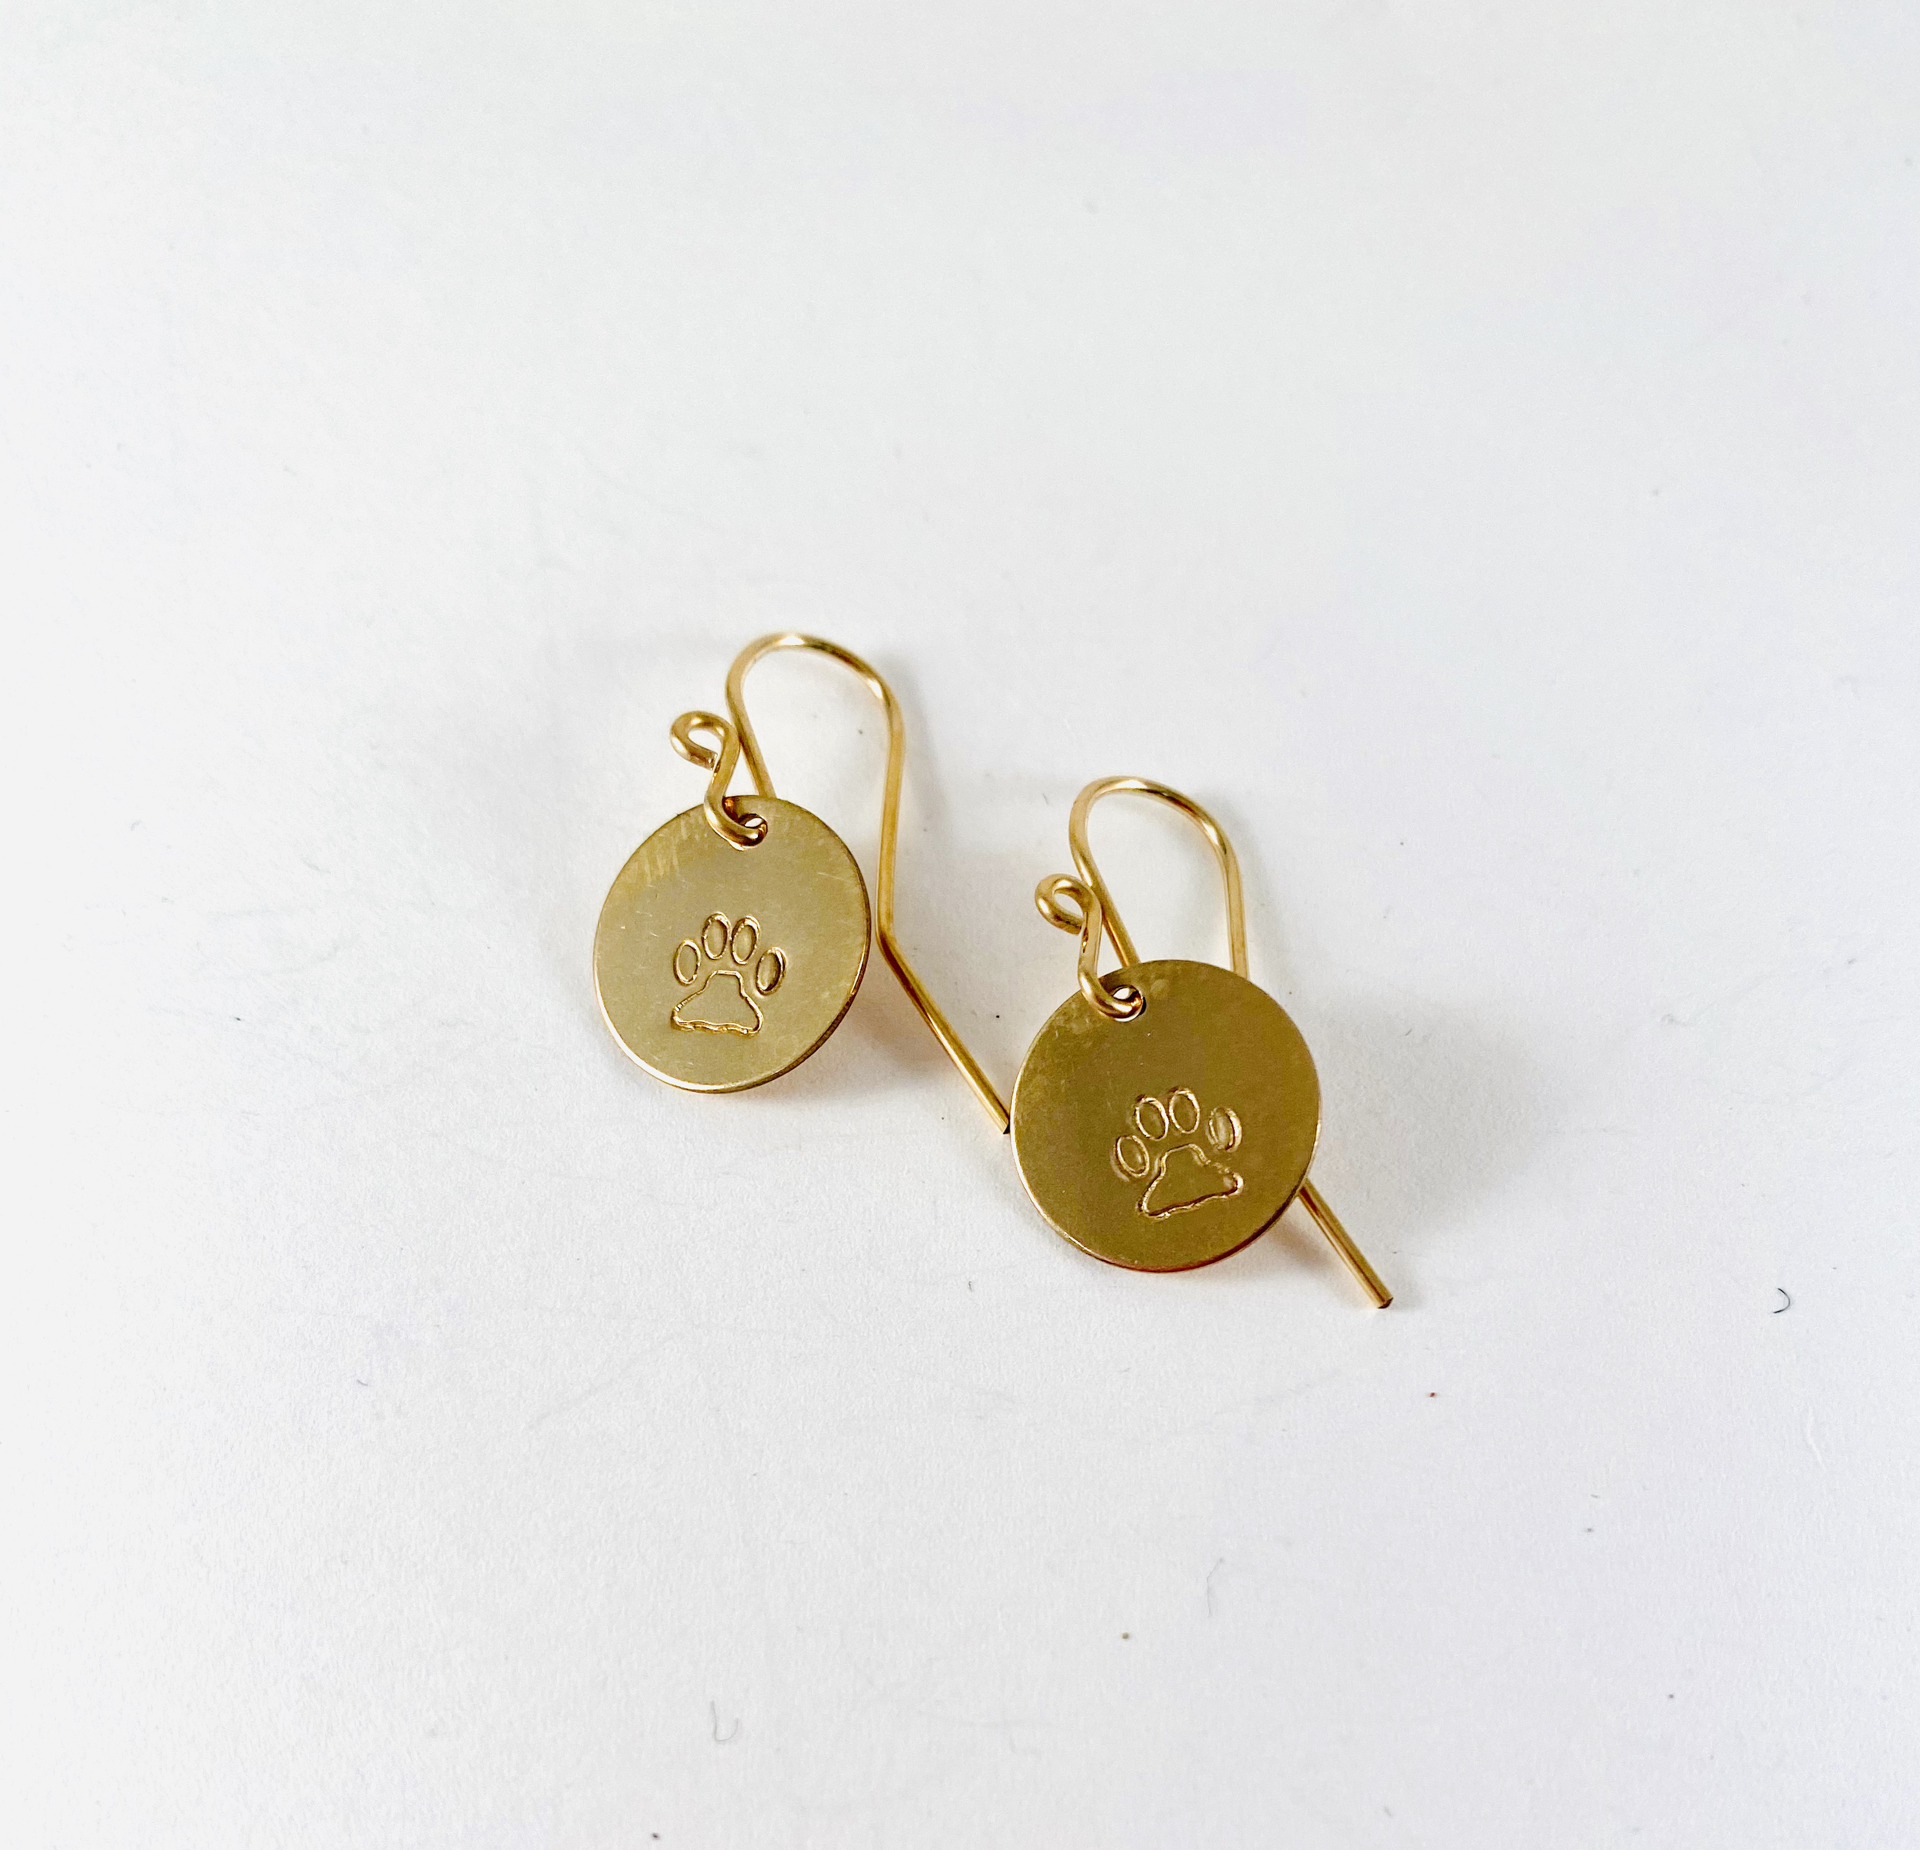 Paw Stamp Earrings by Shelby Lee - jewelry